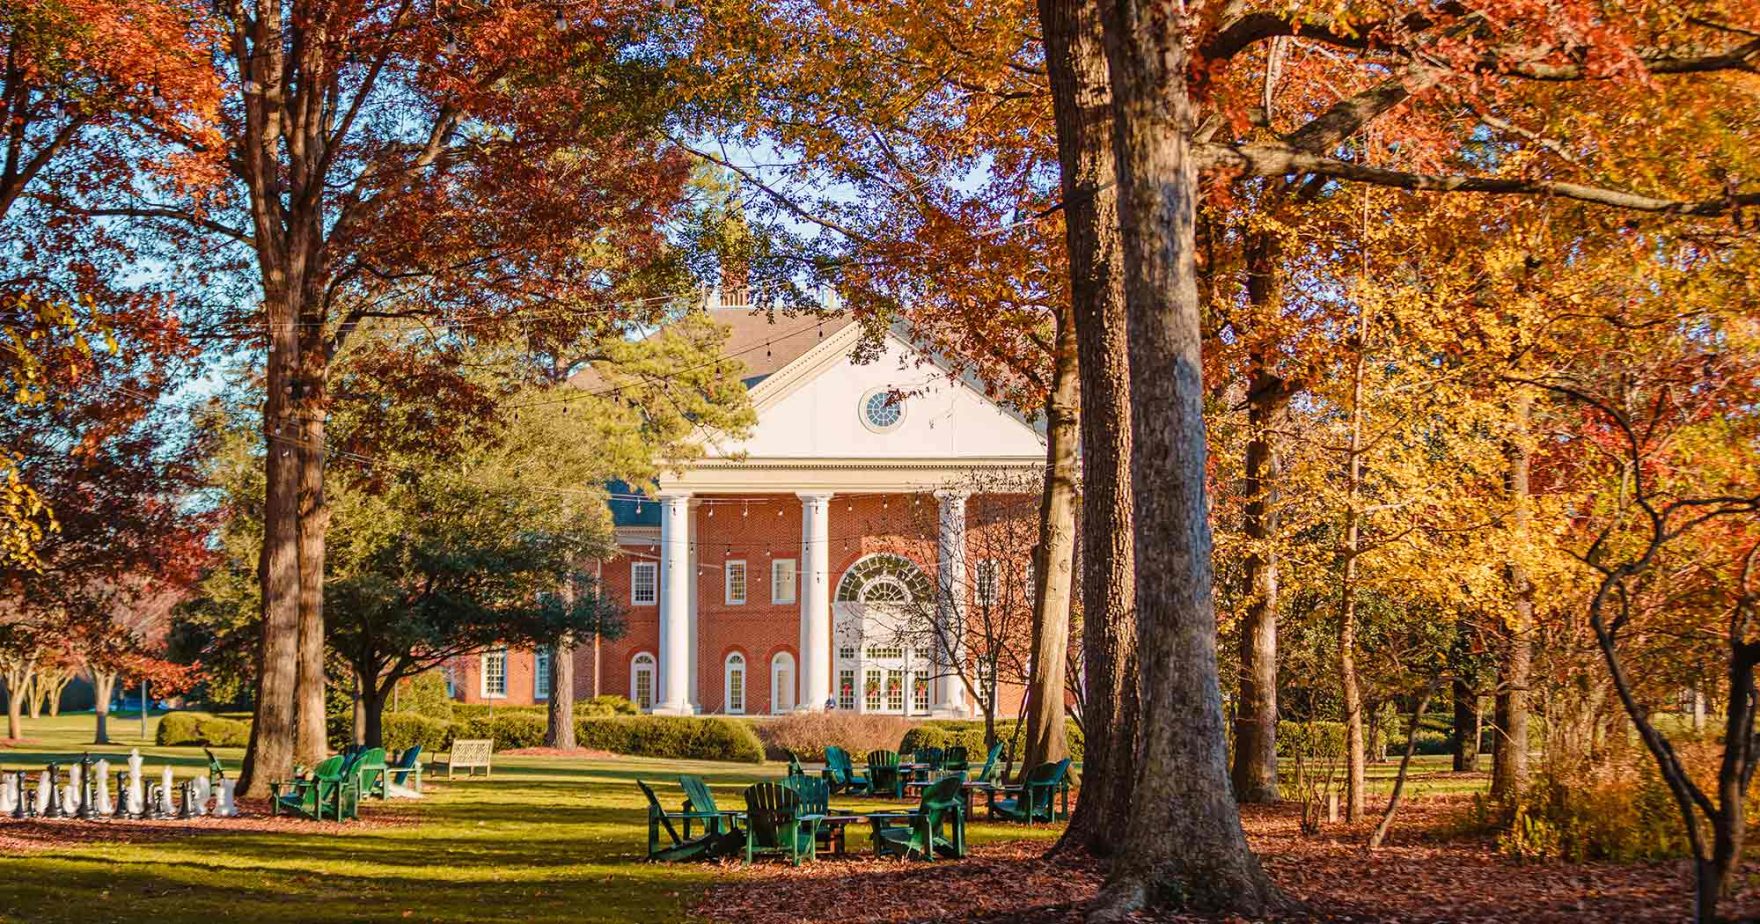 Discover the best degrees to get in 2023 at Regent University.